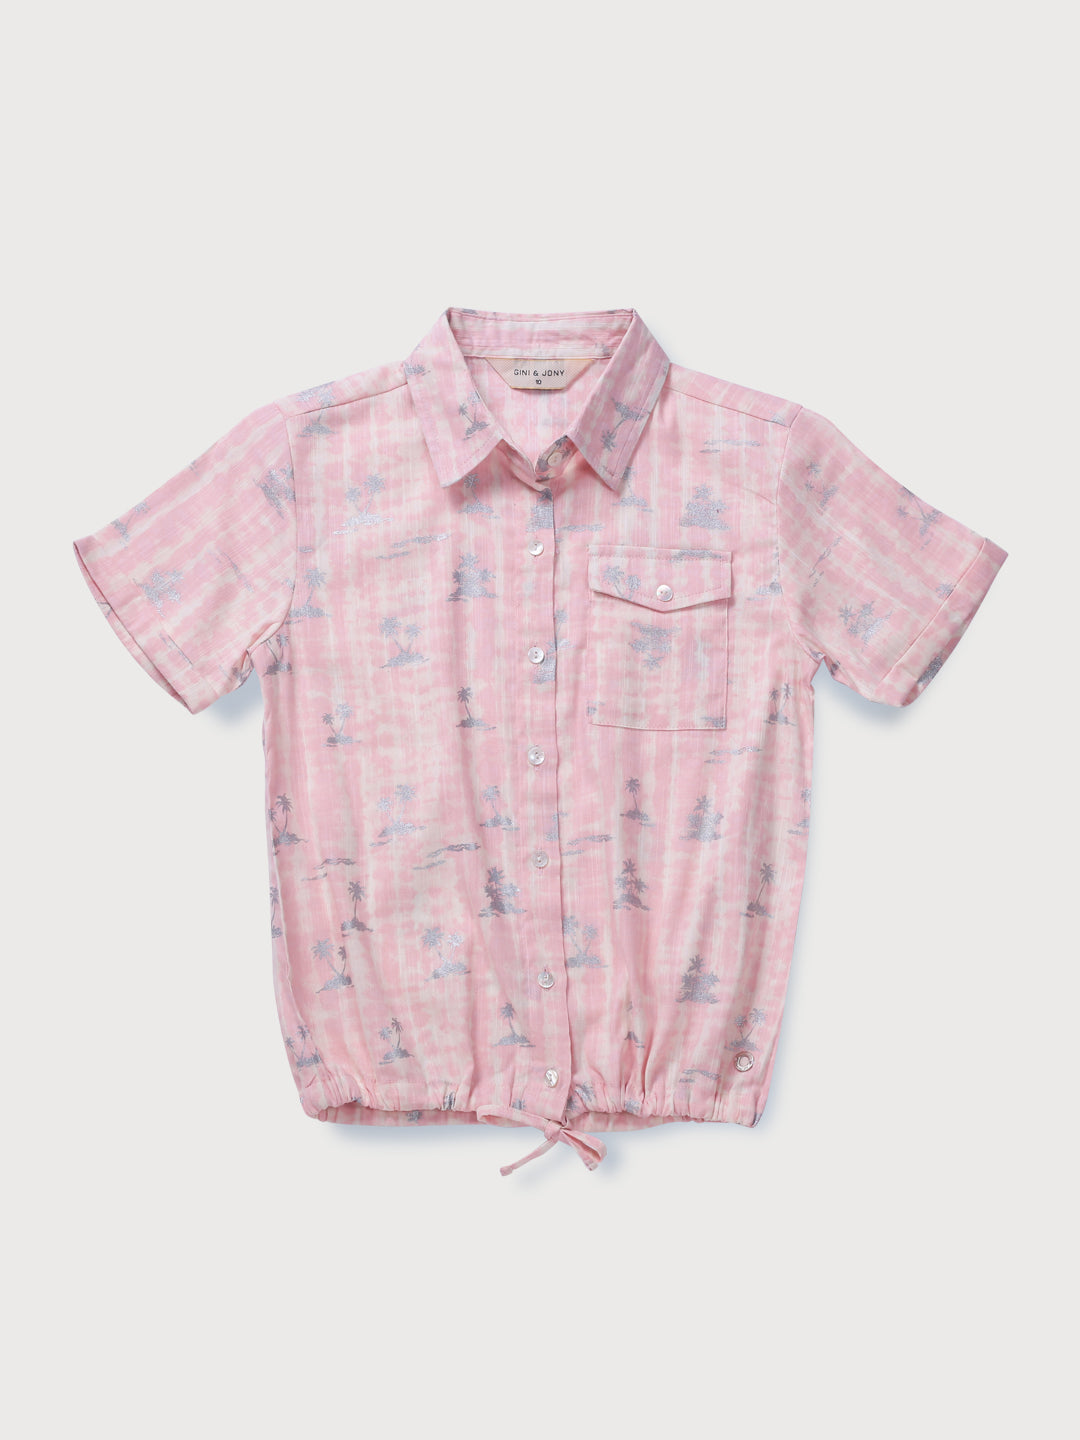 Girls Pink Tie and Dye Woven Woven Top